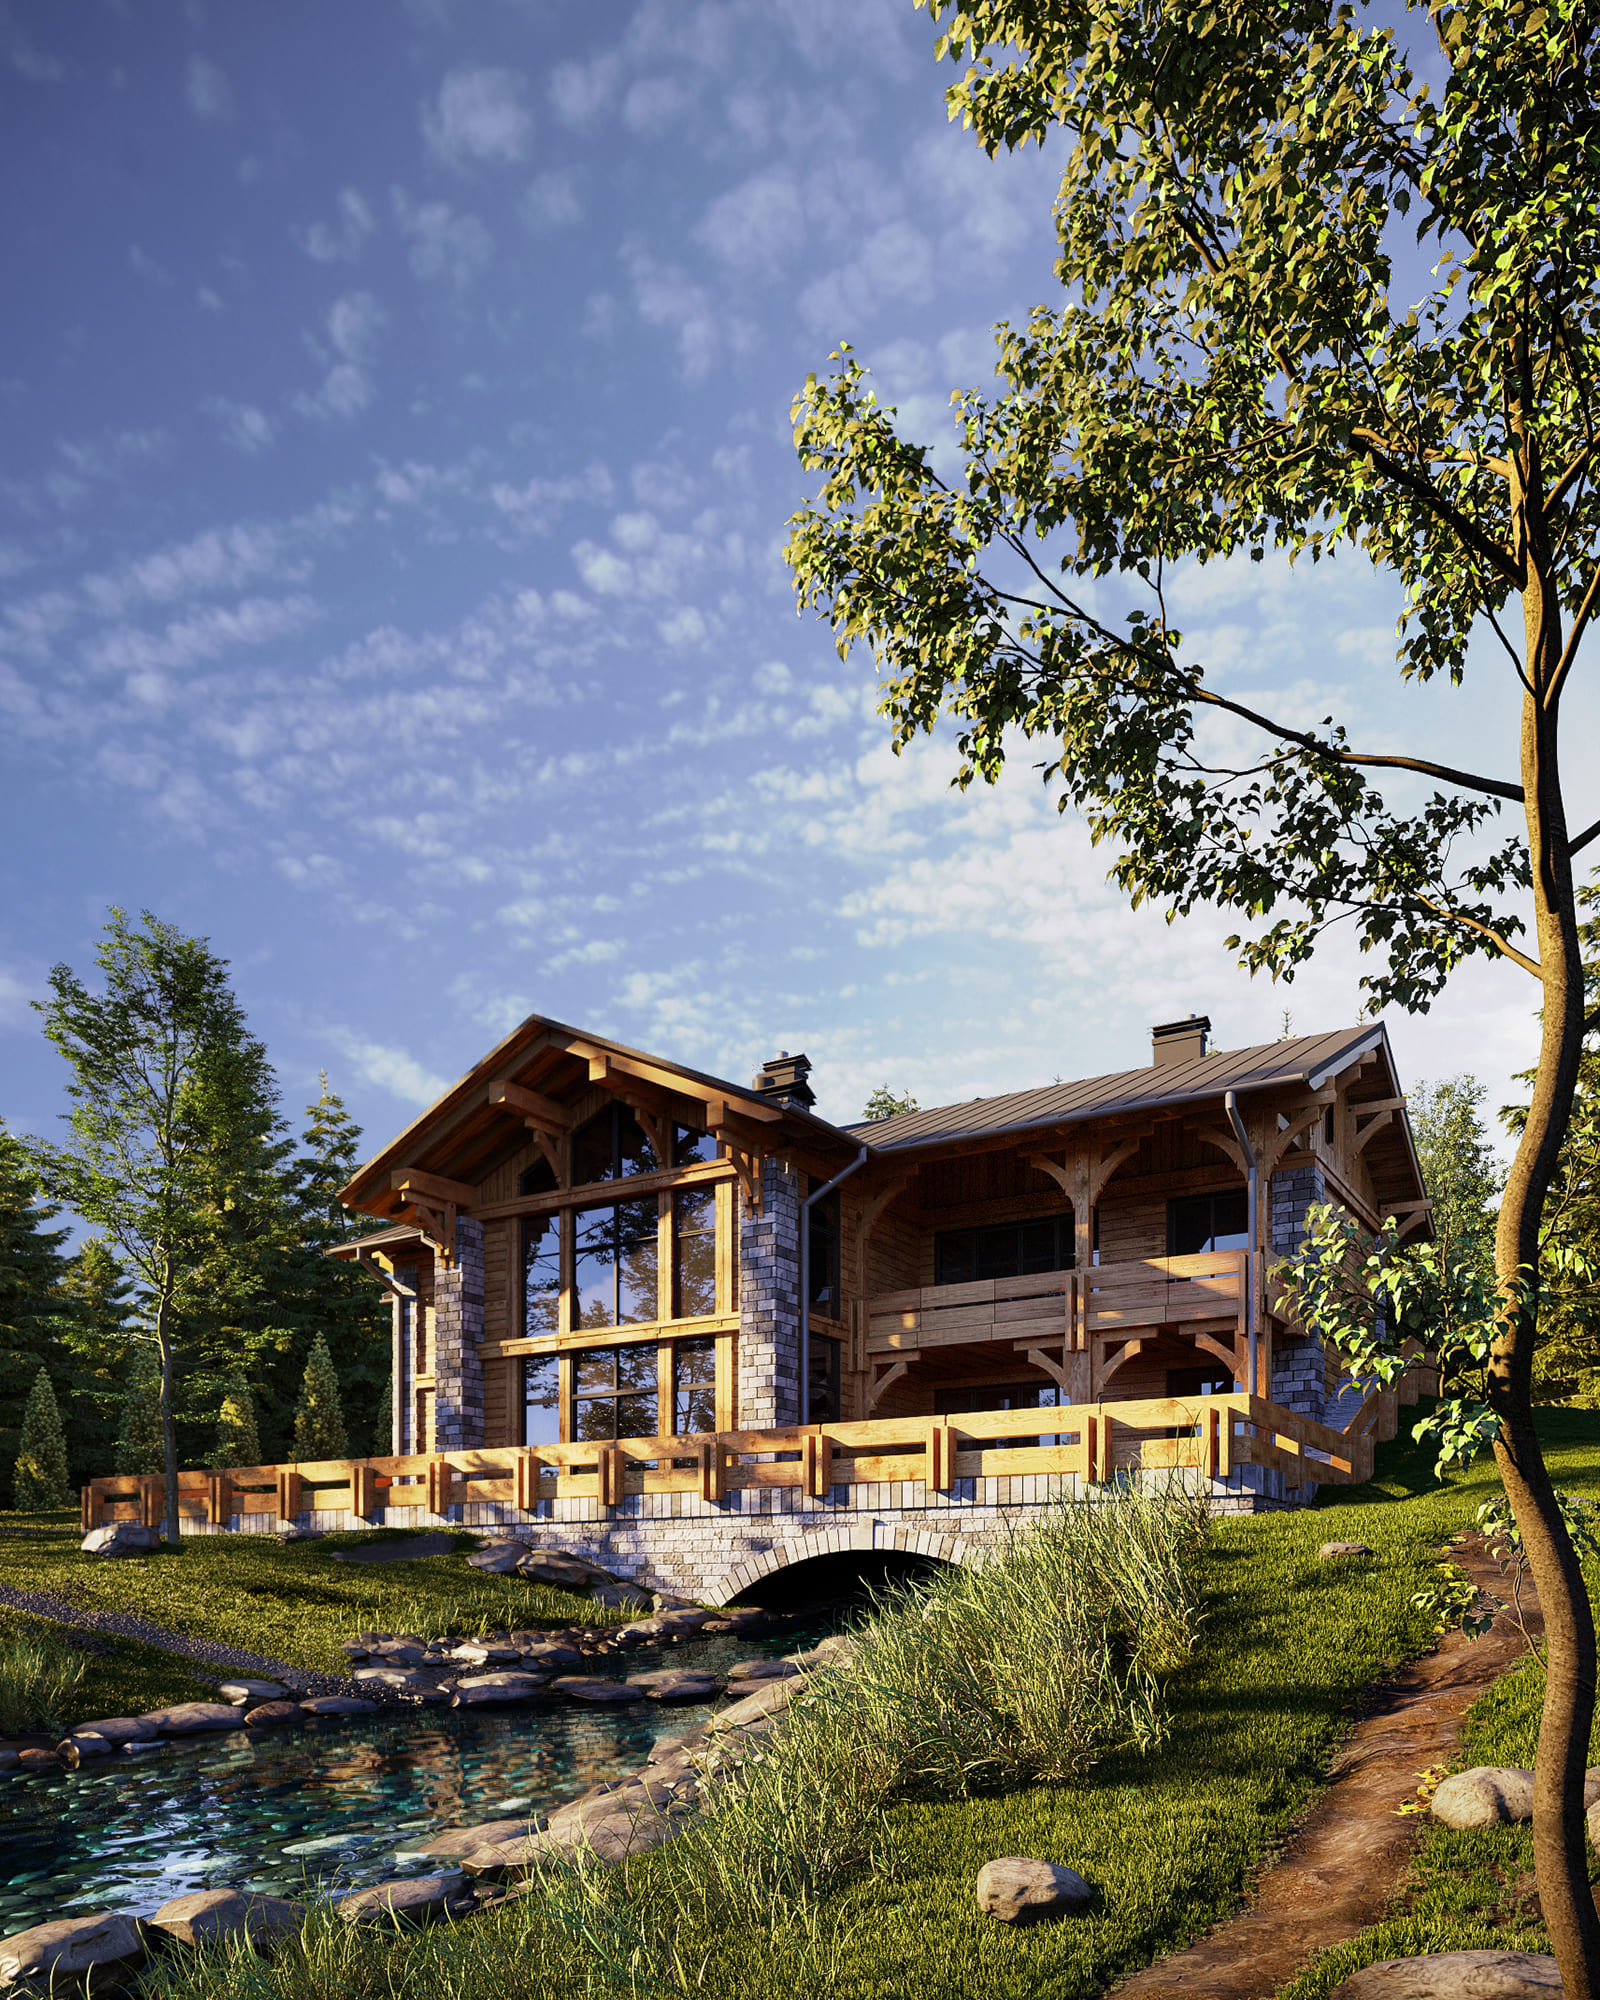 Architectural design in Ukraine. Architectural design of a chalet style house